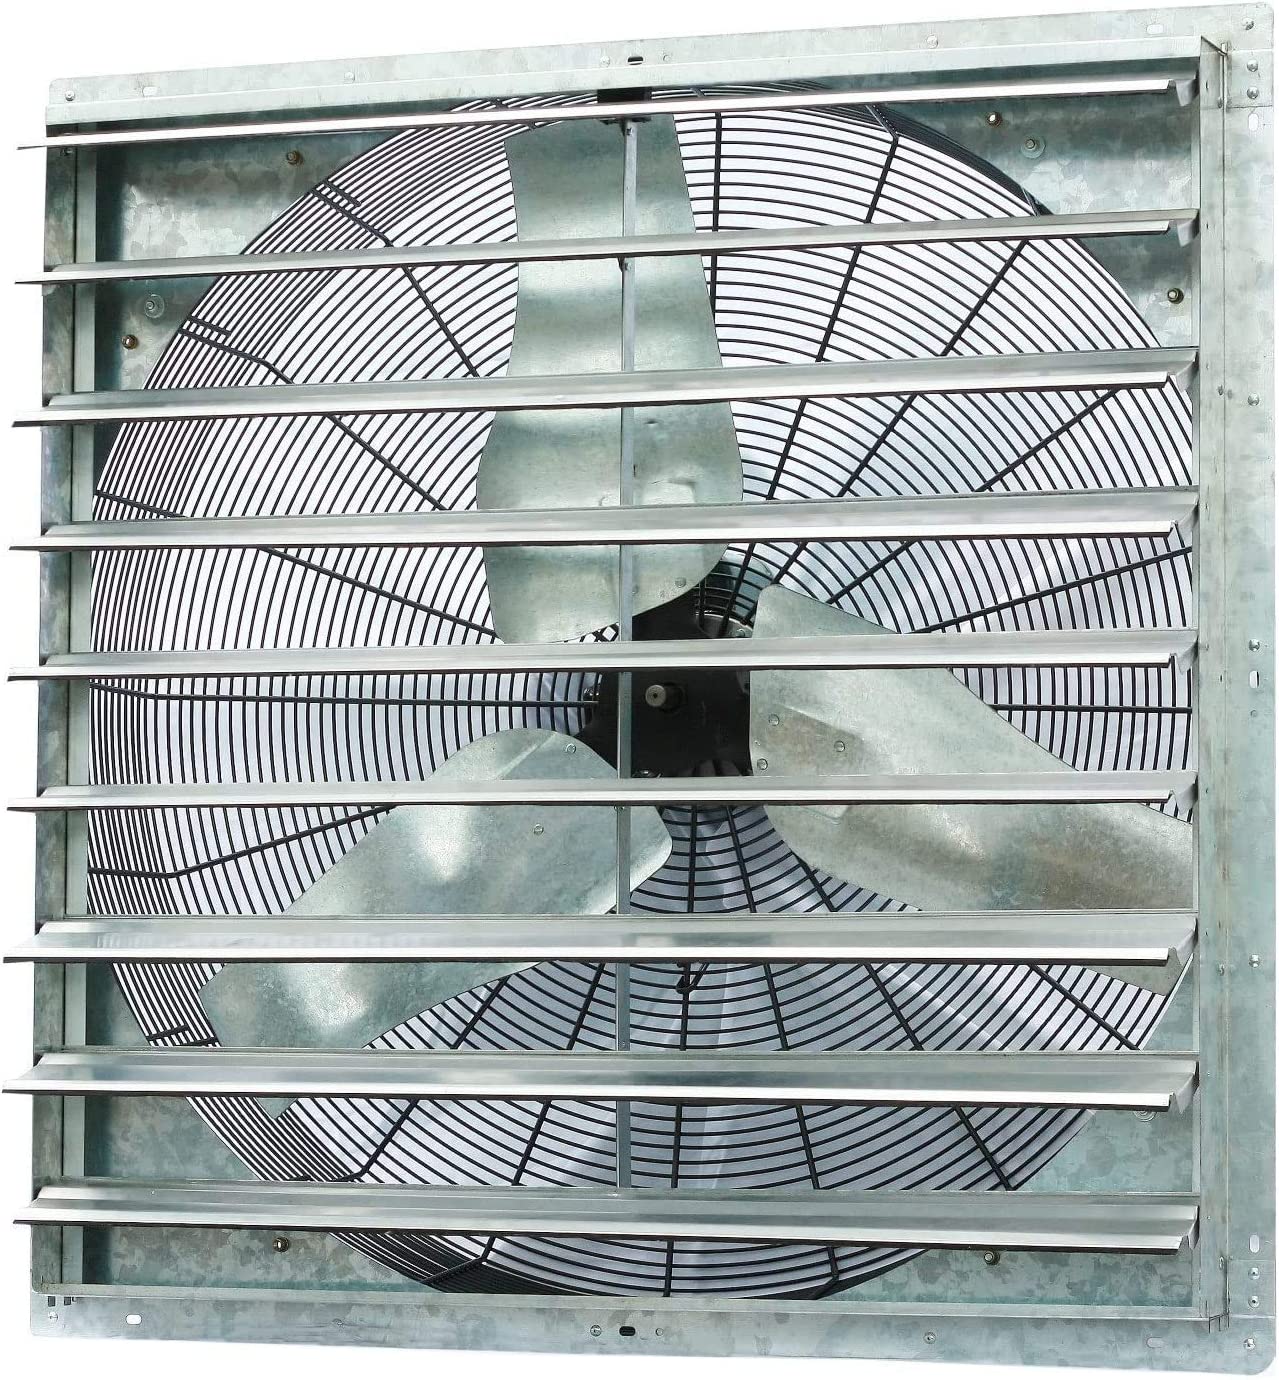 Iliving - 36" Wall Mounted Shutter Exhaust Fan, 6128 CFM, 9000 SQF Coverage Area, Silver (ILG8SF36S) - $247